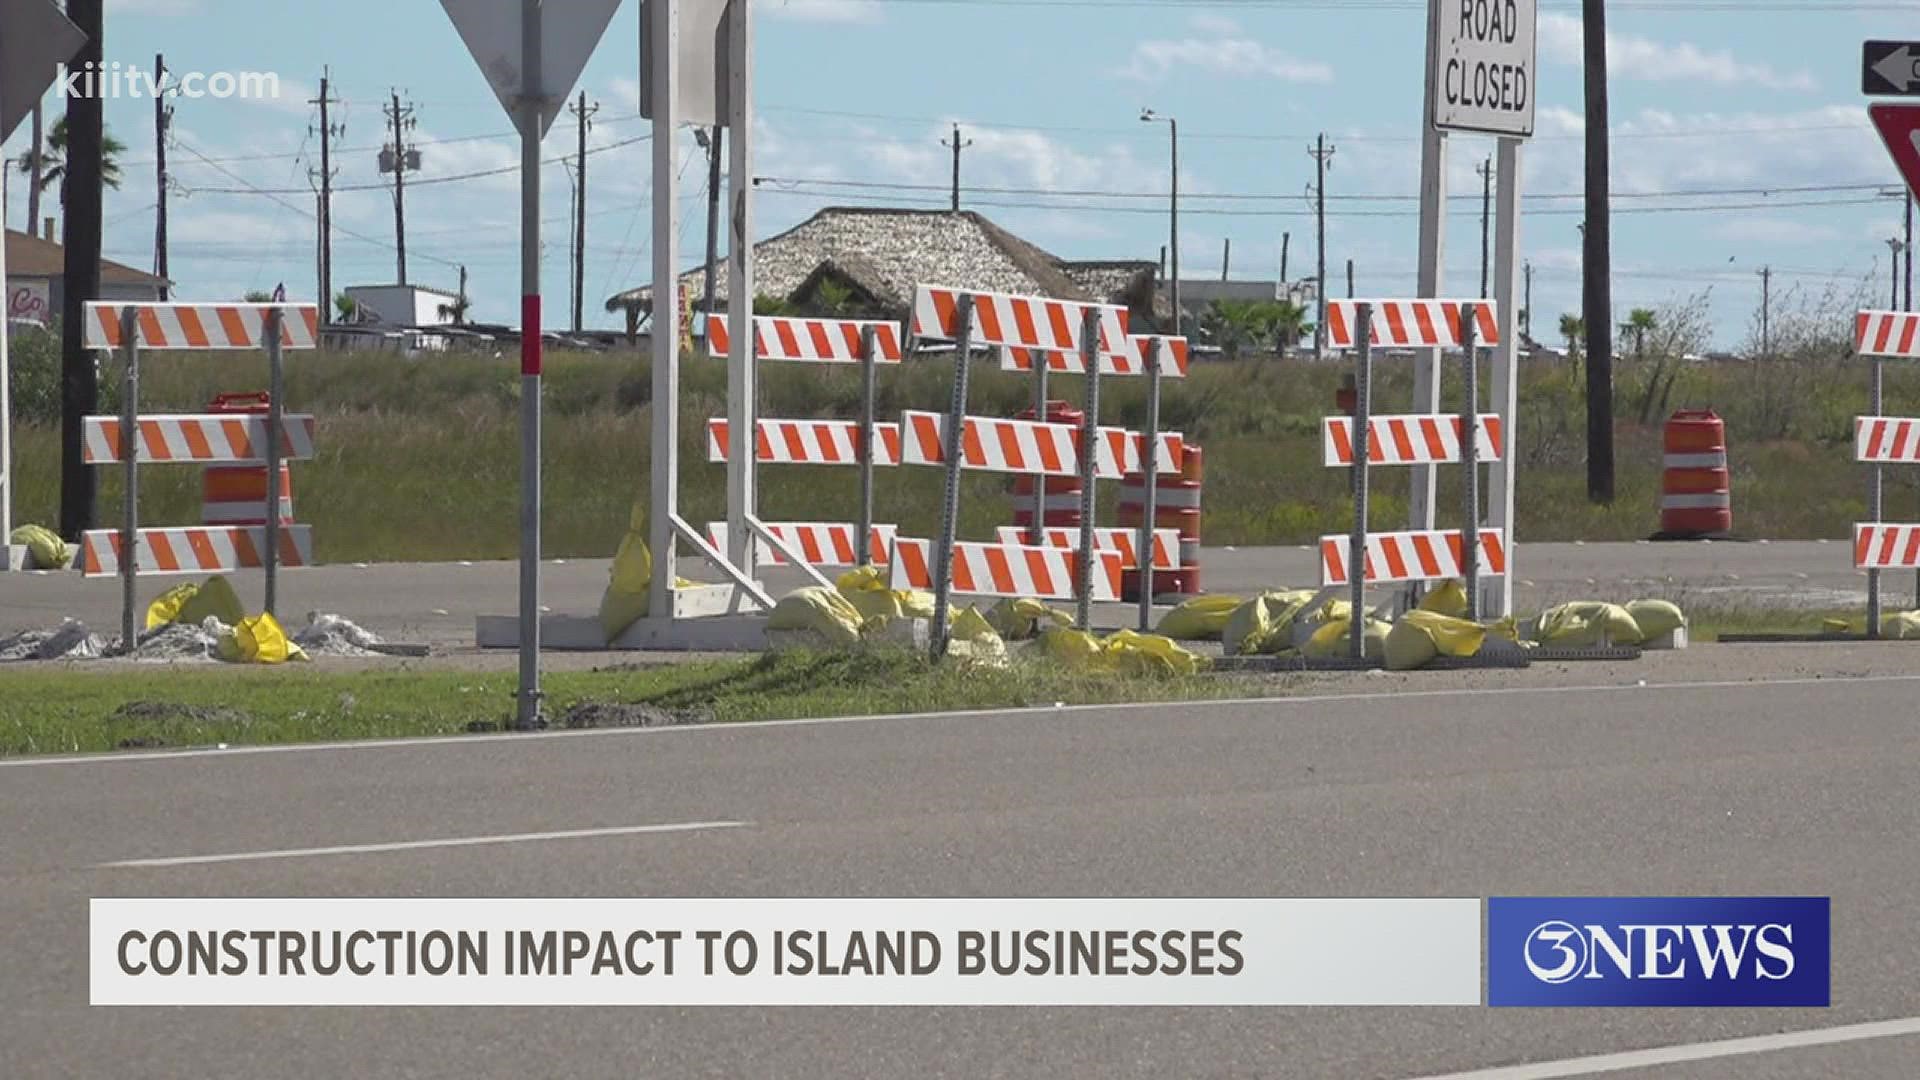 3News spoke to local business owners who said they're looking forward to the improvements.